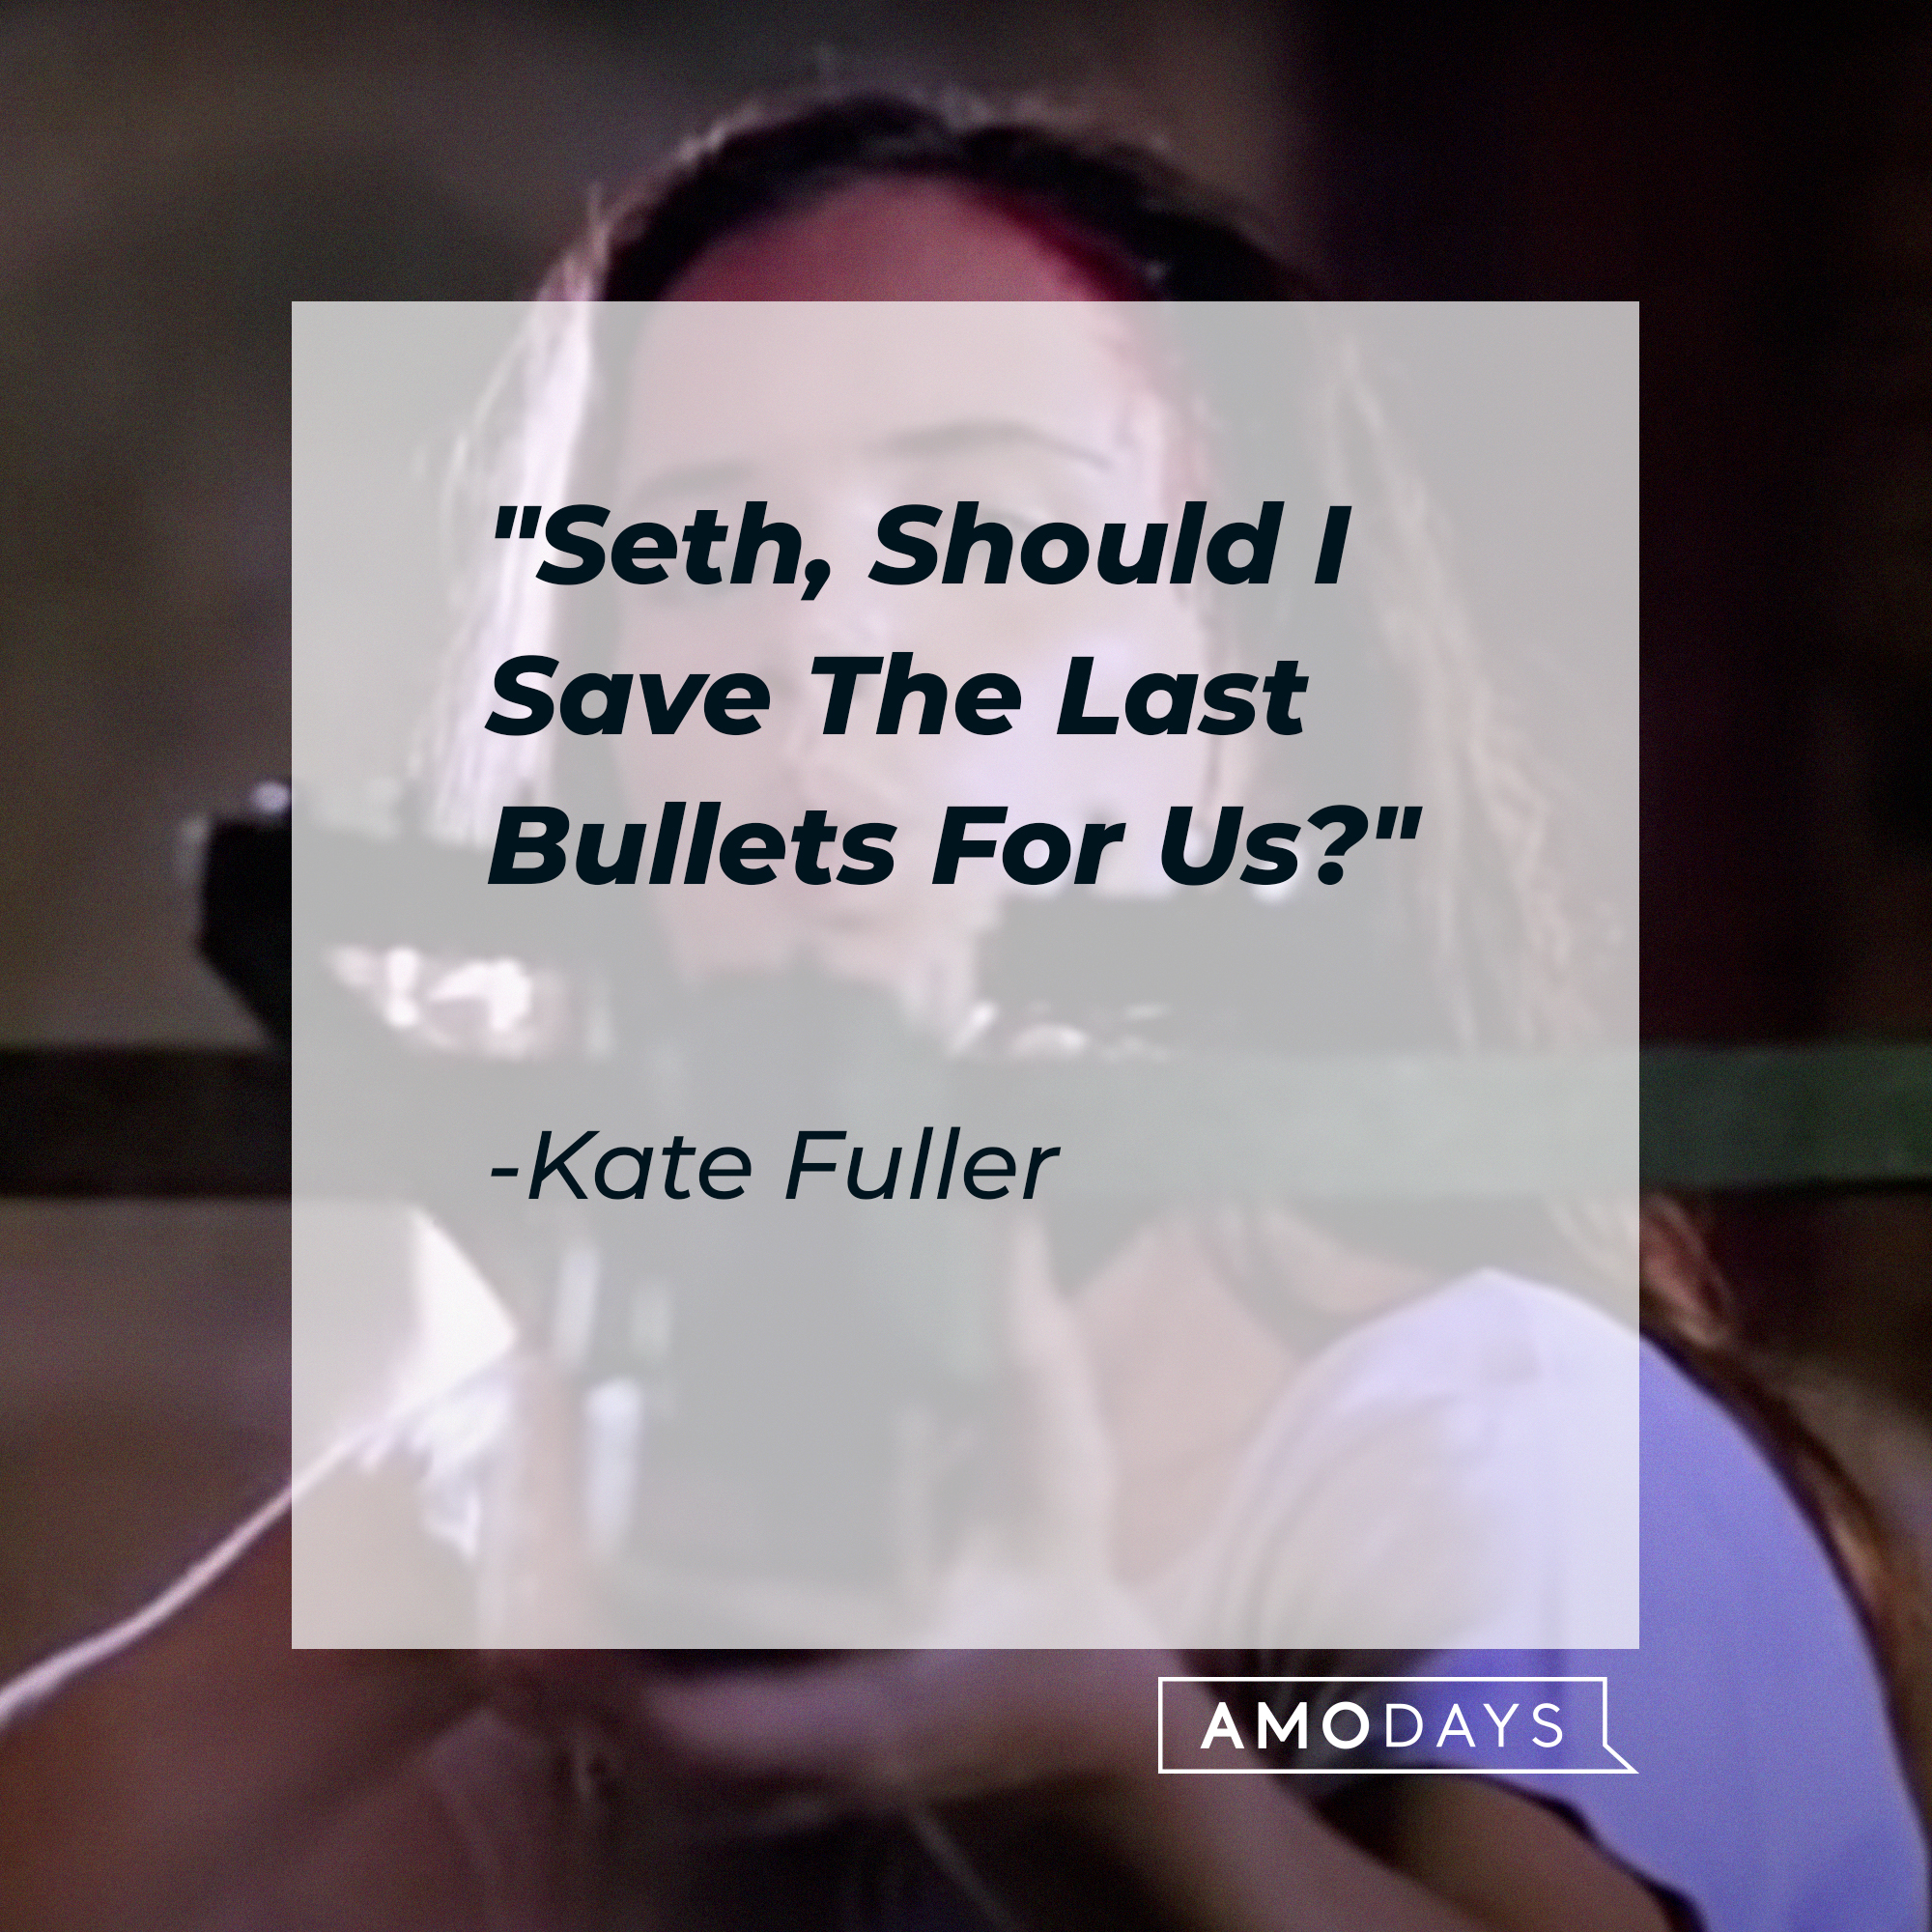 Kate Fuller's quote: "Seth, Should I Save The Last Bullets For Us?" | Source: youtube.com/miramax